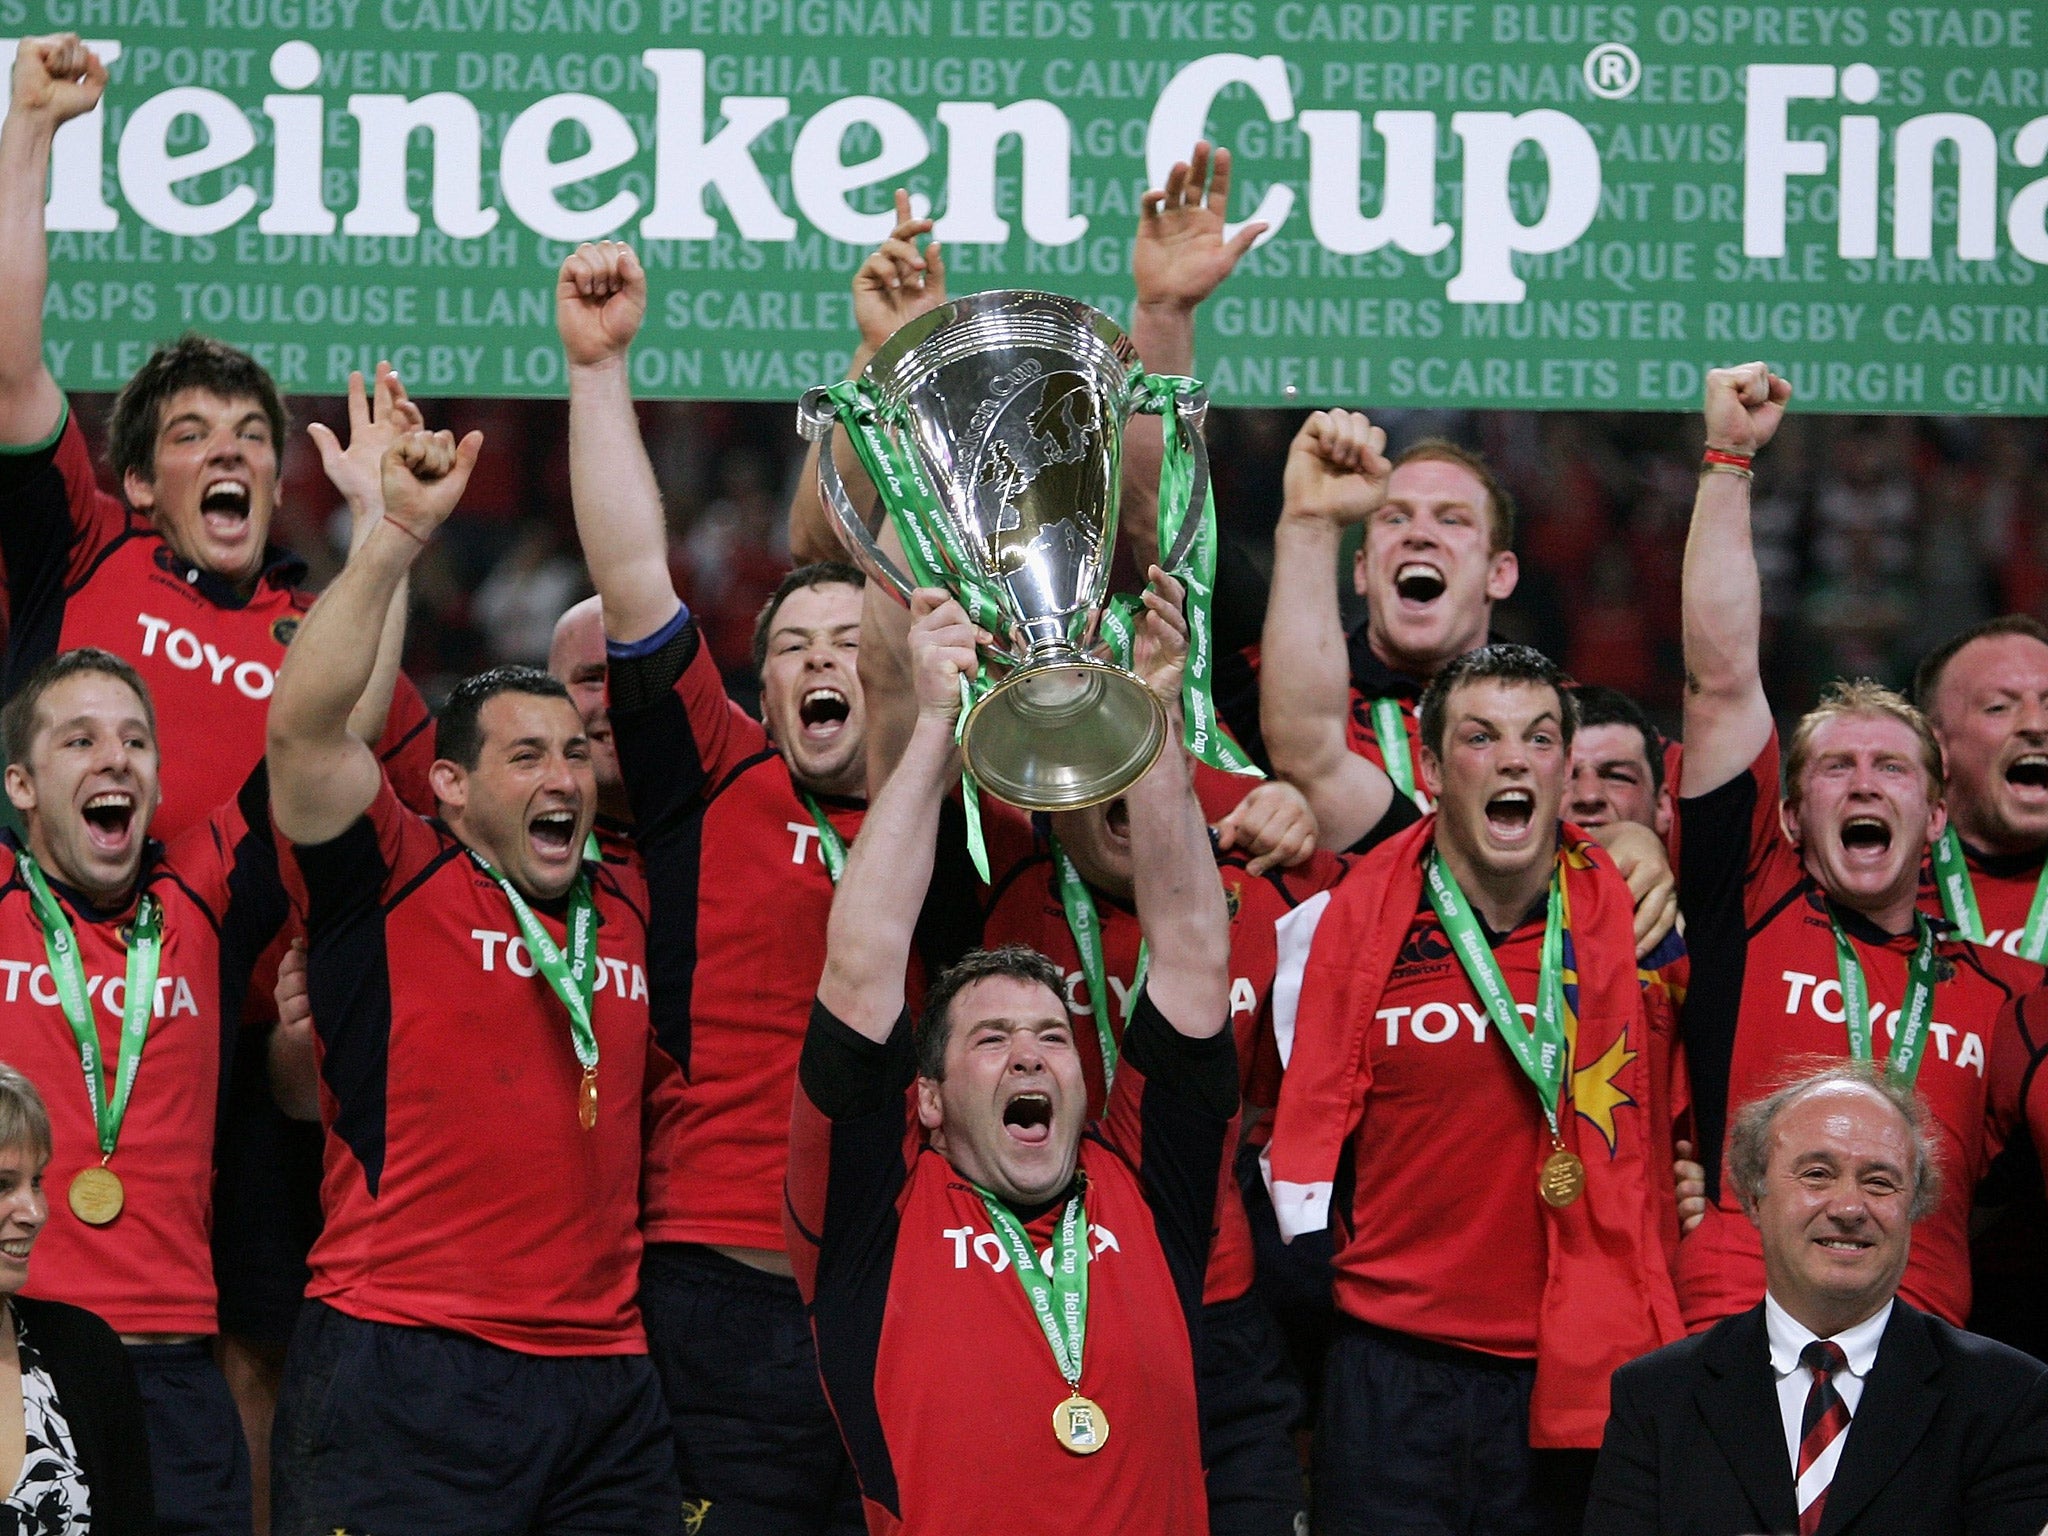 Foley guided Munster to Heineken Cup victory in 2006